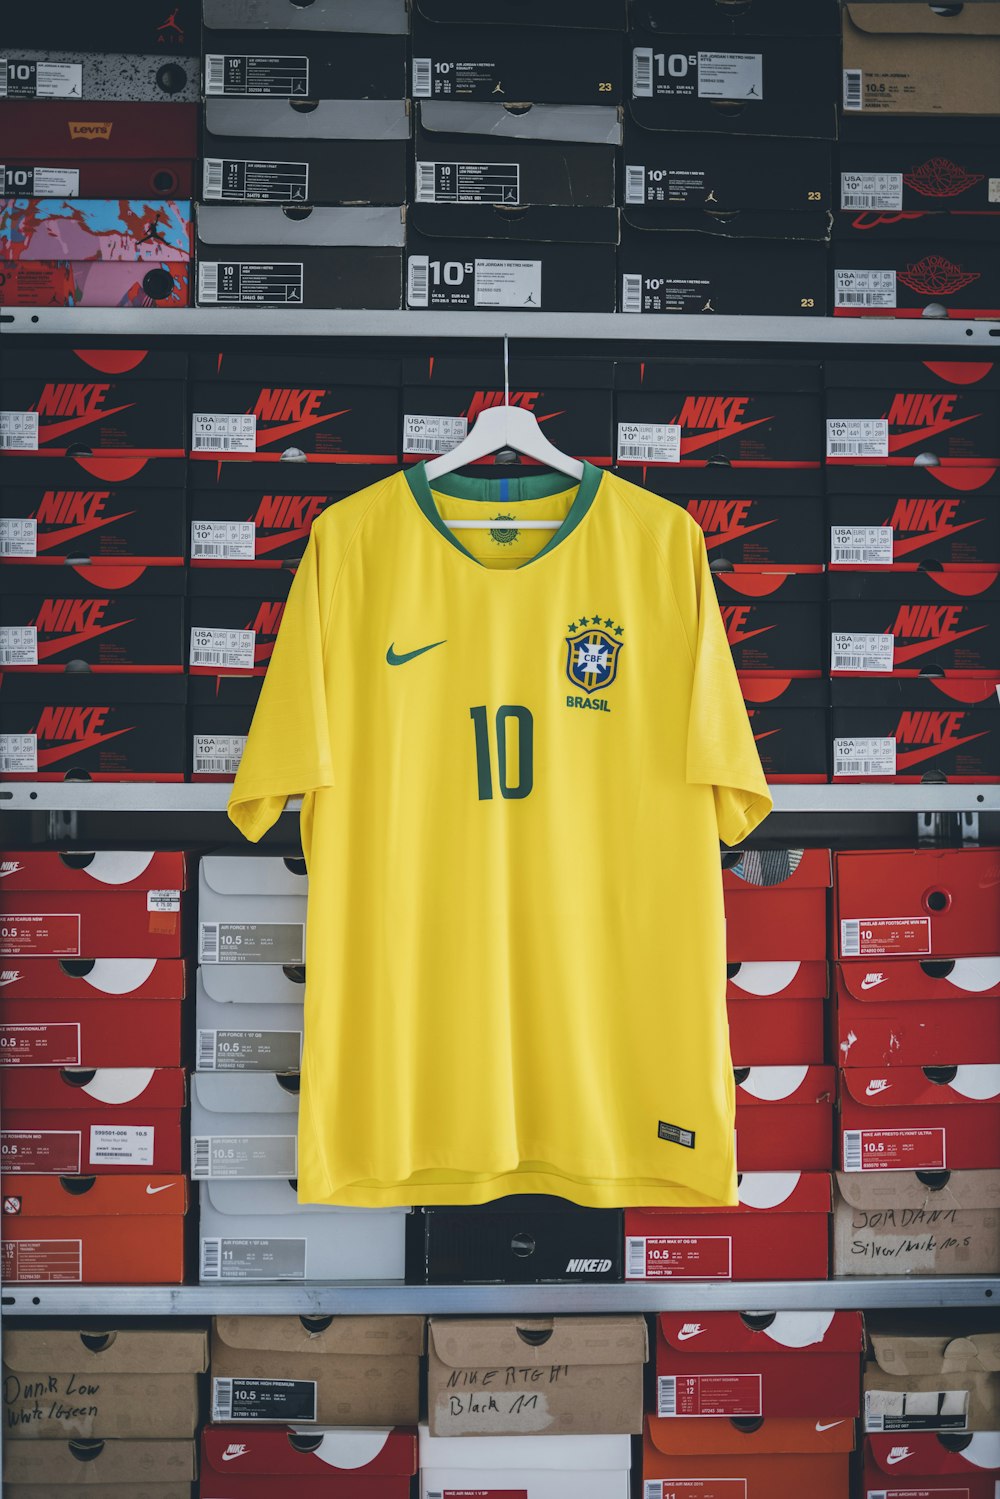 hanging yellow and green Nike soccer jersey shirt